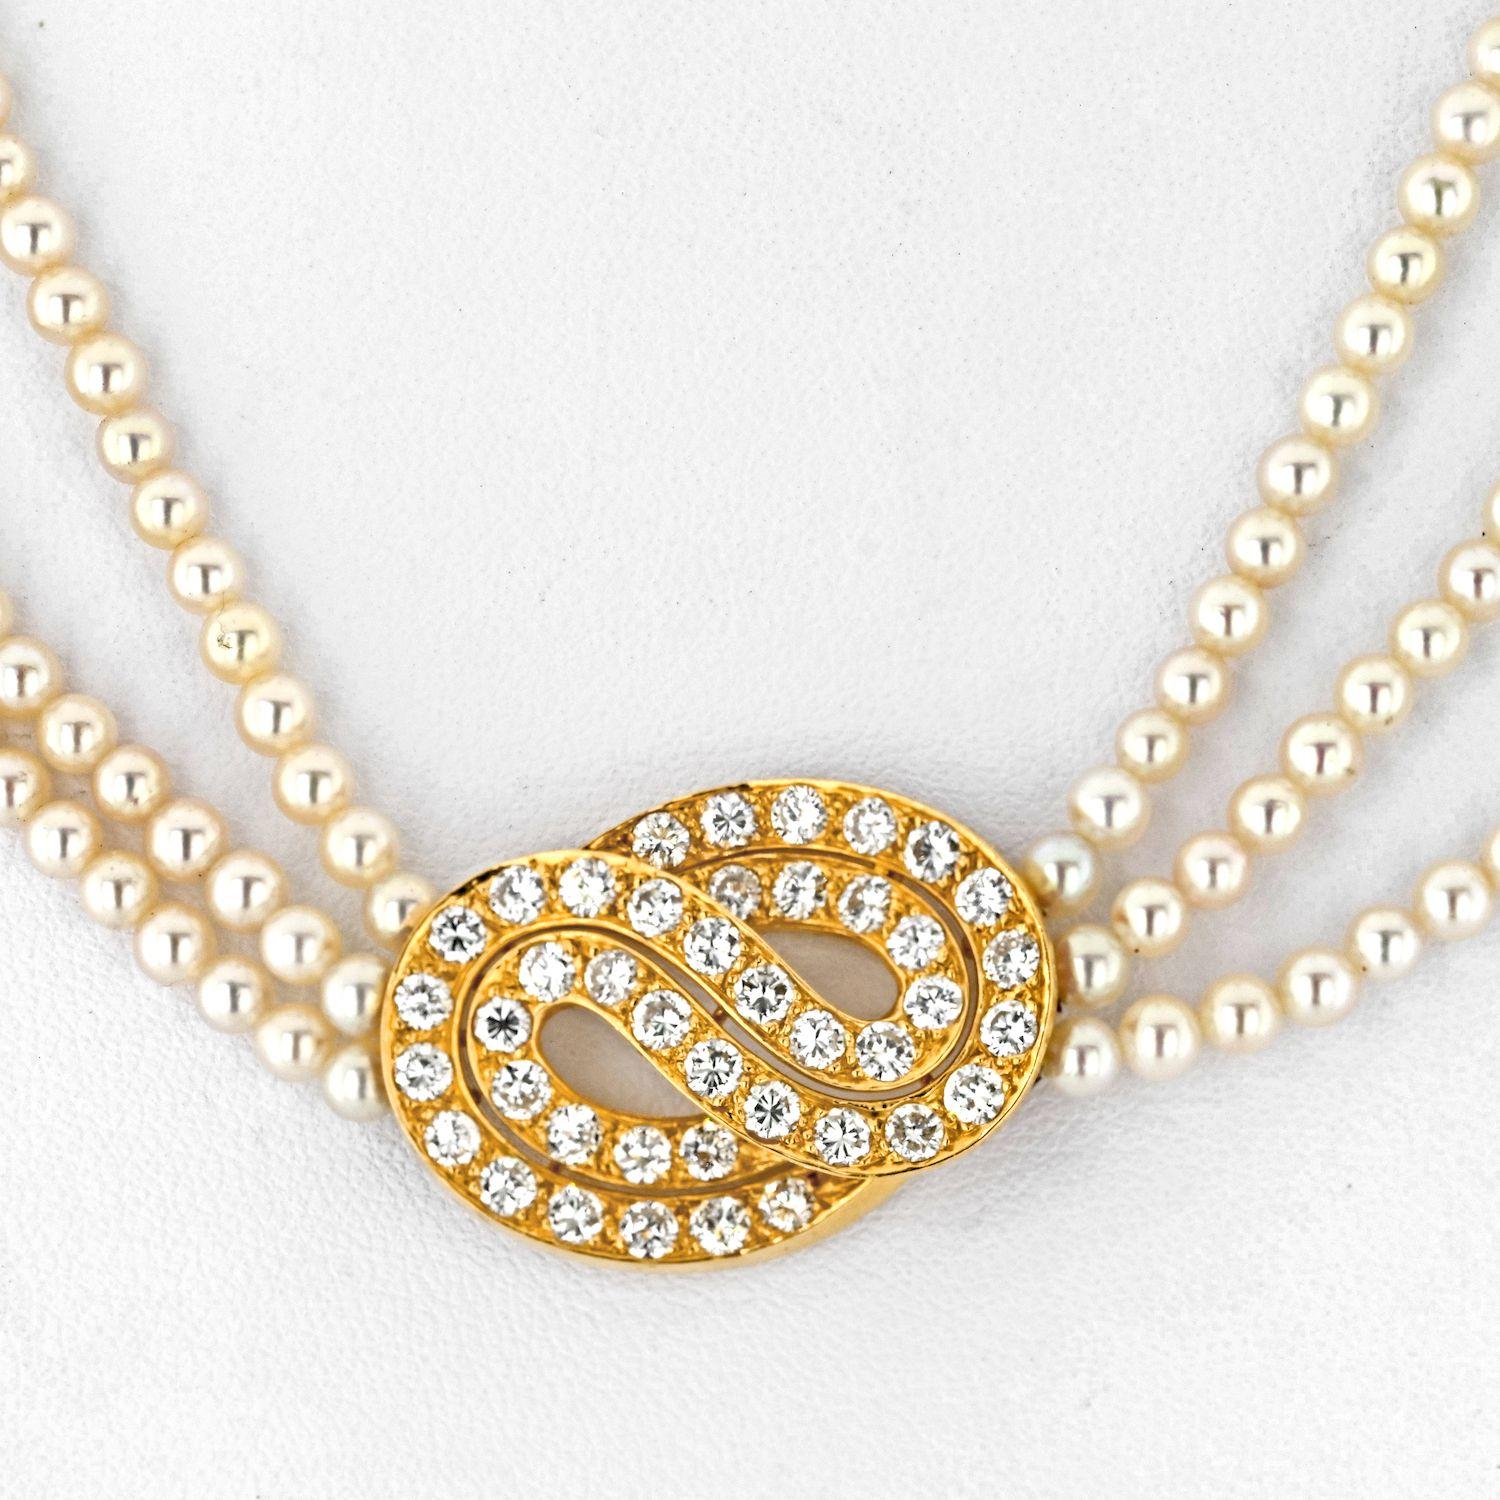 The Van Cleef & Arpels 18K Yellow Gold Multistrand Pearl Diamond Necklace is an exquisite piece of jewelry that radiates sophistication and elegance. This delicate necklace features multiple strands of lustrous pearls, meticulously arranged to